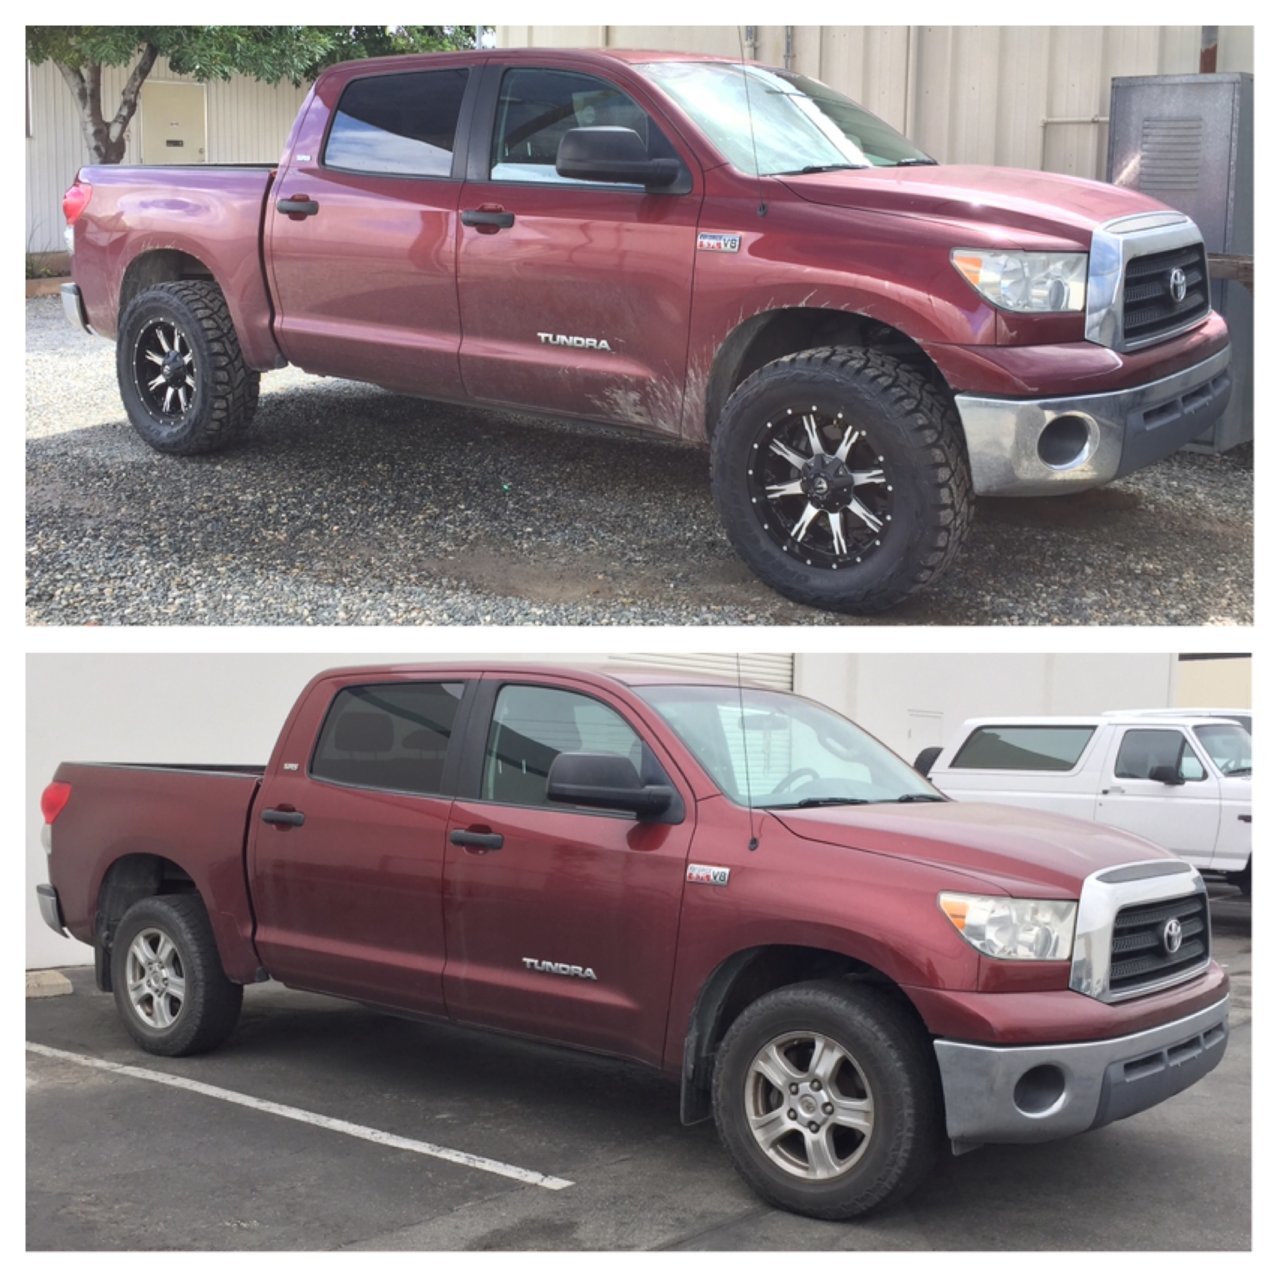 Turning at speed issues | Toyota Tundra Forum